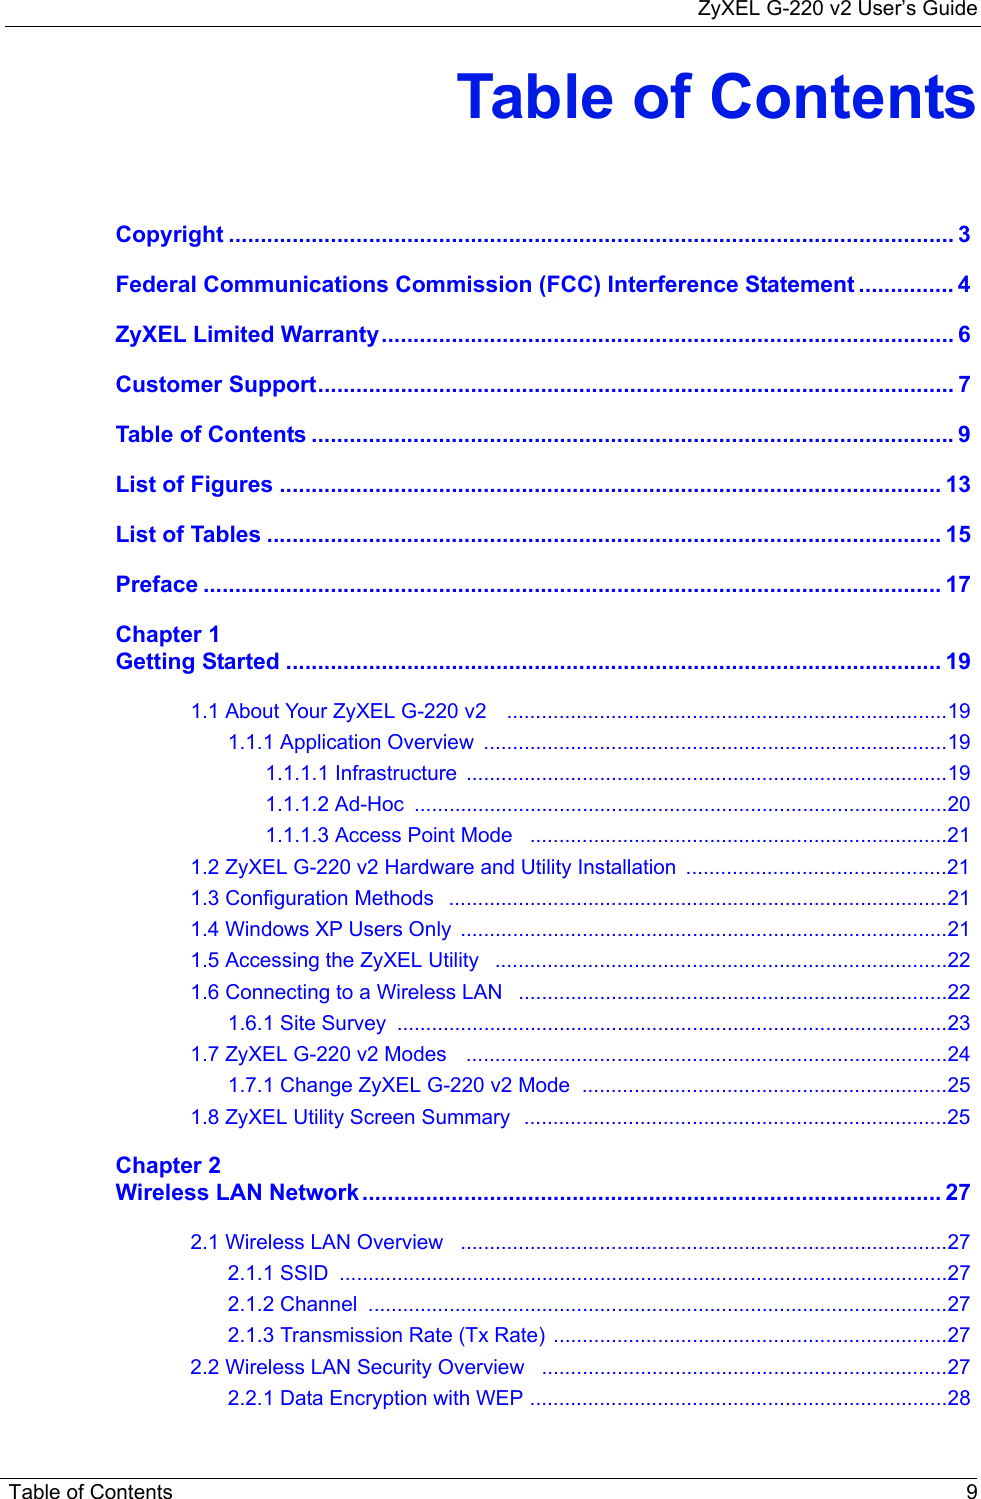 ZyXEL G-220 v2 User’s GuideTable of Contents 9Table of ContentsCopyright .................................................................................................................. 3Federal Communications Commission (FCC) Interference Statement ............... 4ZyXEL Limited Warranty.......................................................................................... 6Customer Support.................................................................................................... 7Table of Contents ..................................................................................................... 9List of Figures ........................................................................................................ 13List of Tables .......................................................................................................... 15Preface .................................................................................................................... 17Chapter 1Getting Started ....................................................................................................... 191.1 About Your ZyXEL G-220 v2    ............................................................................191.1.1 Application Overview  ................................................................................191.1.1.1 Infrastructure  ...................................................................................191.1.1.2 Ad-Hoc  ............................................................................................201.1.1.3 Access Point Mode   ........................................................................211.2 ZyXEL G-220 v2 Hardware and Utility Installation  .............................................211.3 Configuration Methods   ......................................................................................211.4 Windows XP Users Only  ....................................................................................211.5 Accessing the ZyXEL Utility   ..............................................................................221.6 Connecting to a Wireless LAN   ..........................................................................221.6.1 Site Survey  ...............................................................................................231.7 ZyXEL G-220 v2 Modes   ...................................................................................241.7.1 Change ZyXEL G-220 v2 Mode  ...............................................................251.8 ZyXEL Utility Screen Summary  .........................................................................25Chapter 2Wireless LAN Network ........................................................................................... 272.1 Wireless LAN Overview   ....................................................................................272.1.1 SSID  .........................................................................................................272.1.2 Channel  ....................................................................................................272.1.3 Transmission Rate (Tx Rate) ....................................................................272.2 Wireless LAN Security Overview   ......................................................................272.2.1 Data Encryption with WEP ........................................................................28